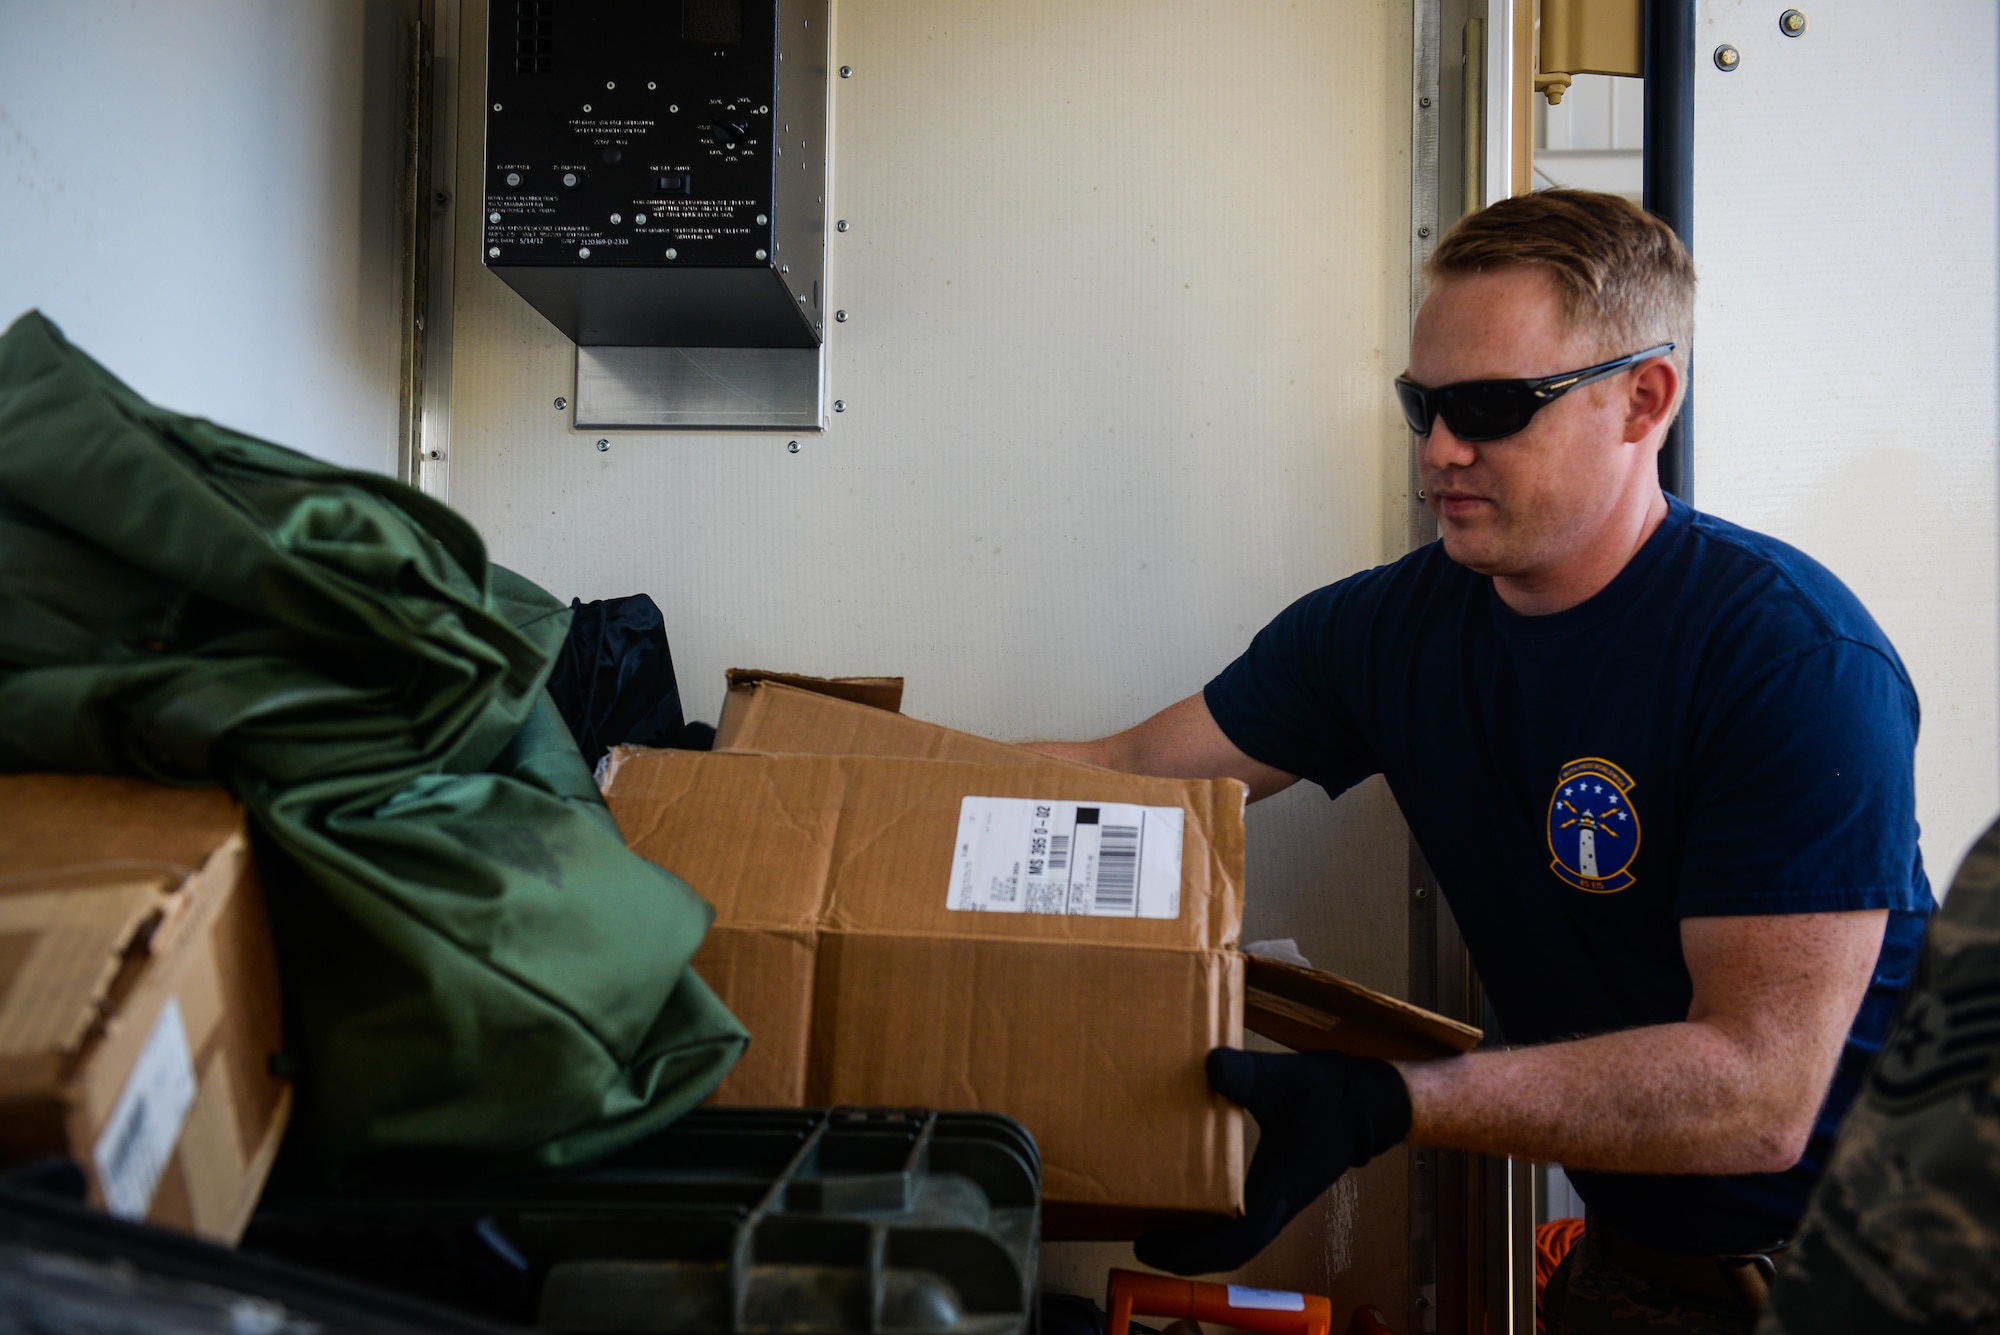 Staff Sgt. Skyler Hart, 85th Engineering Installation Squadron quality assurance, loads equipment into a cargo container for a deployment to aid Puerto Rico at the 85th EIS Vehicle Operations building on Keesler Air Force Base, Mississippi. In the wake of Hurricane Maria, Puerto Rico’s land mobile radio communications infrastructure for first responders are in dire need of repair and the 85th EIS were requested by name to help get it back up and running. (U.S. Air Force photo by Senior Airman Travis Beihl)